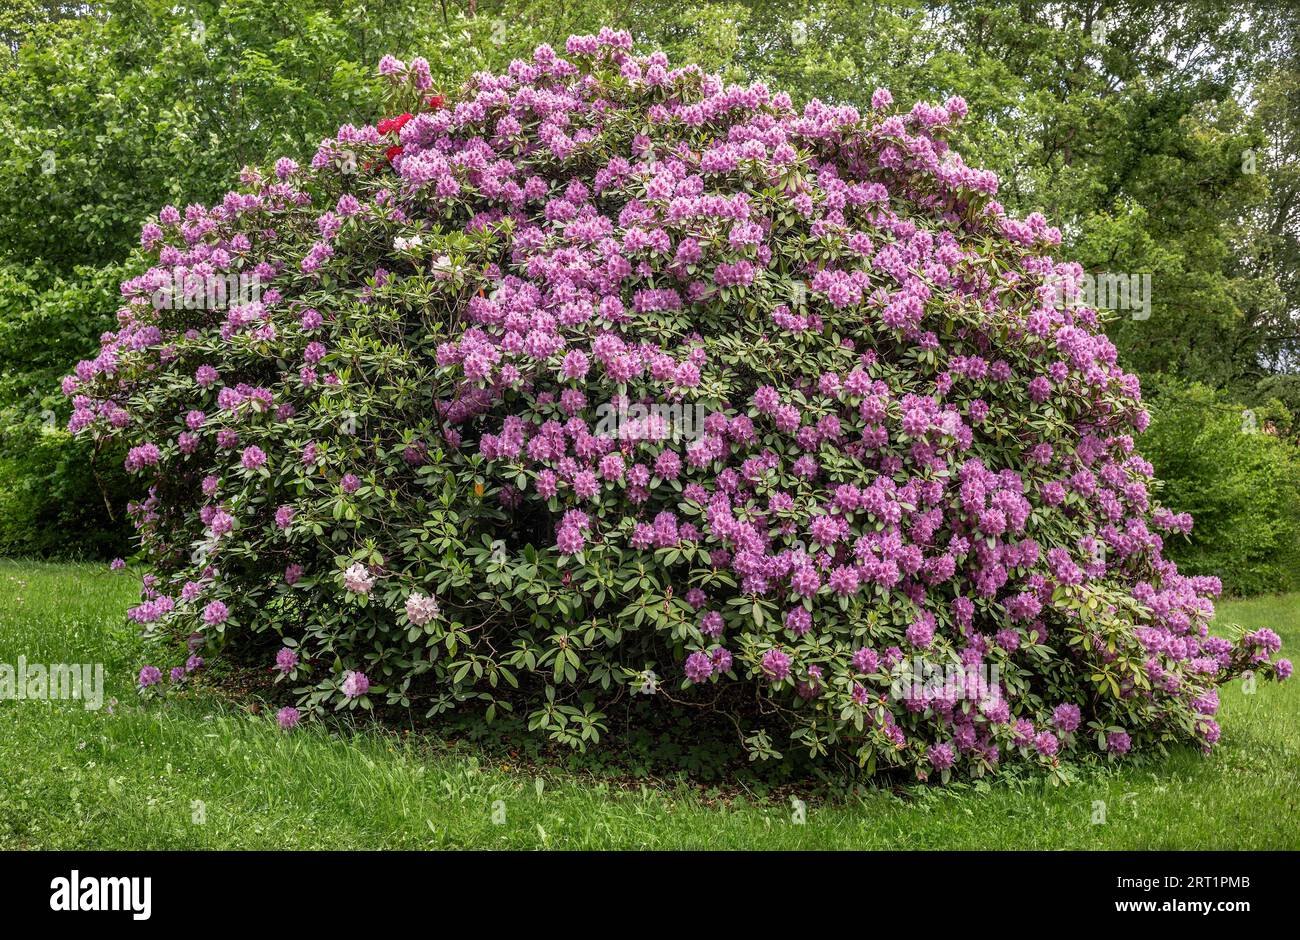 Rhododendron bush in Muenhberg City Park Stock Photo